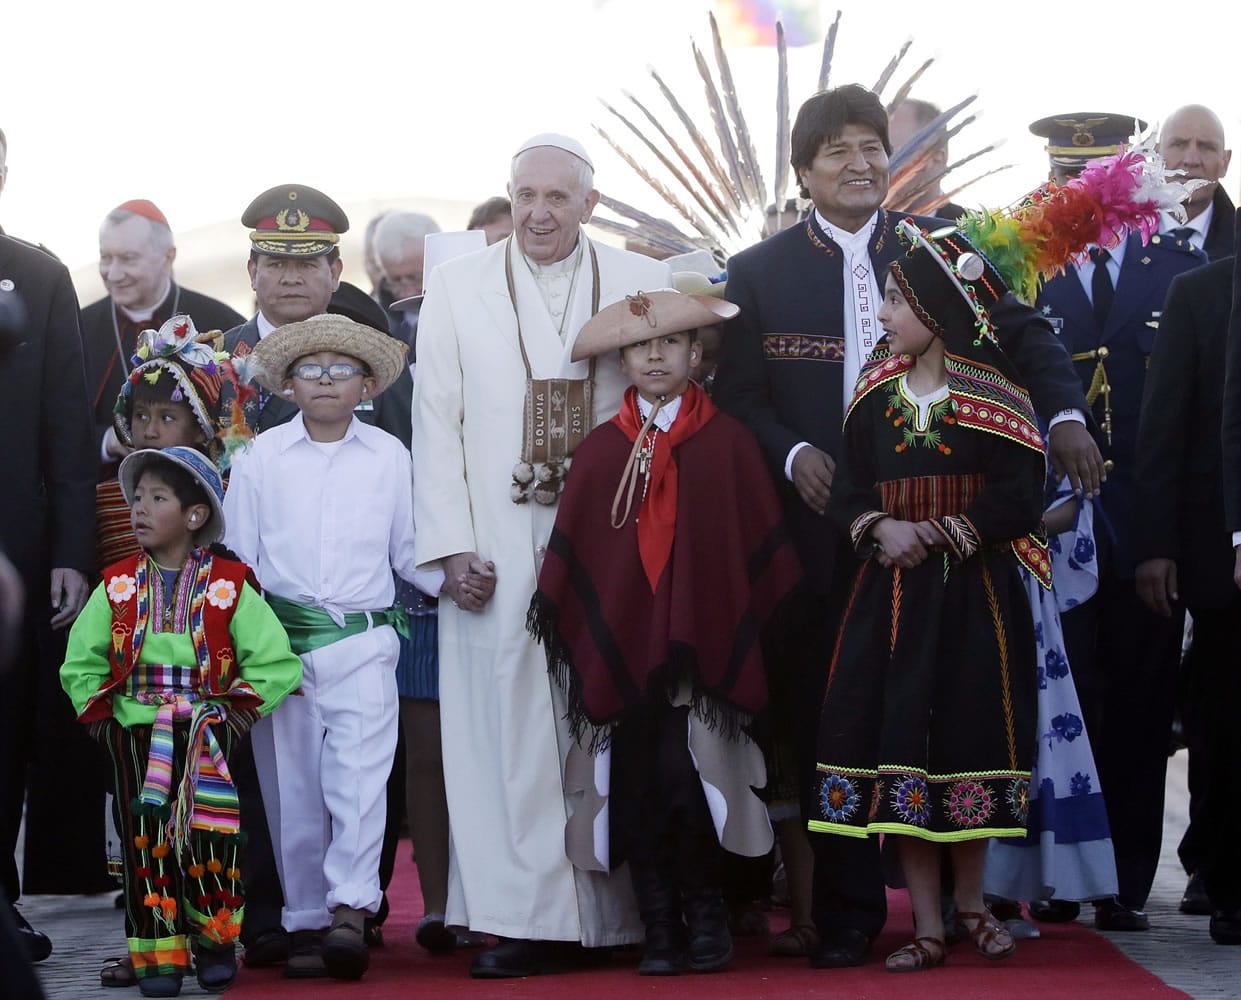 Pope Francis holds hands with children wearing traditional costumes as he walks with Bolivian President Evo Morales upon his arrival at the El Alto airport, Bolivia, Wednesday, July 8, 2015. The pouch Francis is wearing around his neck was given to him by Morales. It's woven of alpaca with indigenous trimmings and traditionally used by people in the Andes to hold coca leaves, which they chew to ward off the ill effects of extreme altitude. Due to the altitude, the pope will spend only a few hours in the capital city La Paz, during his South American tour. Bolivia is the second of three countries Francis will be visiting on his South American tour.